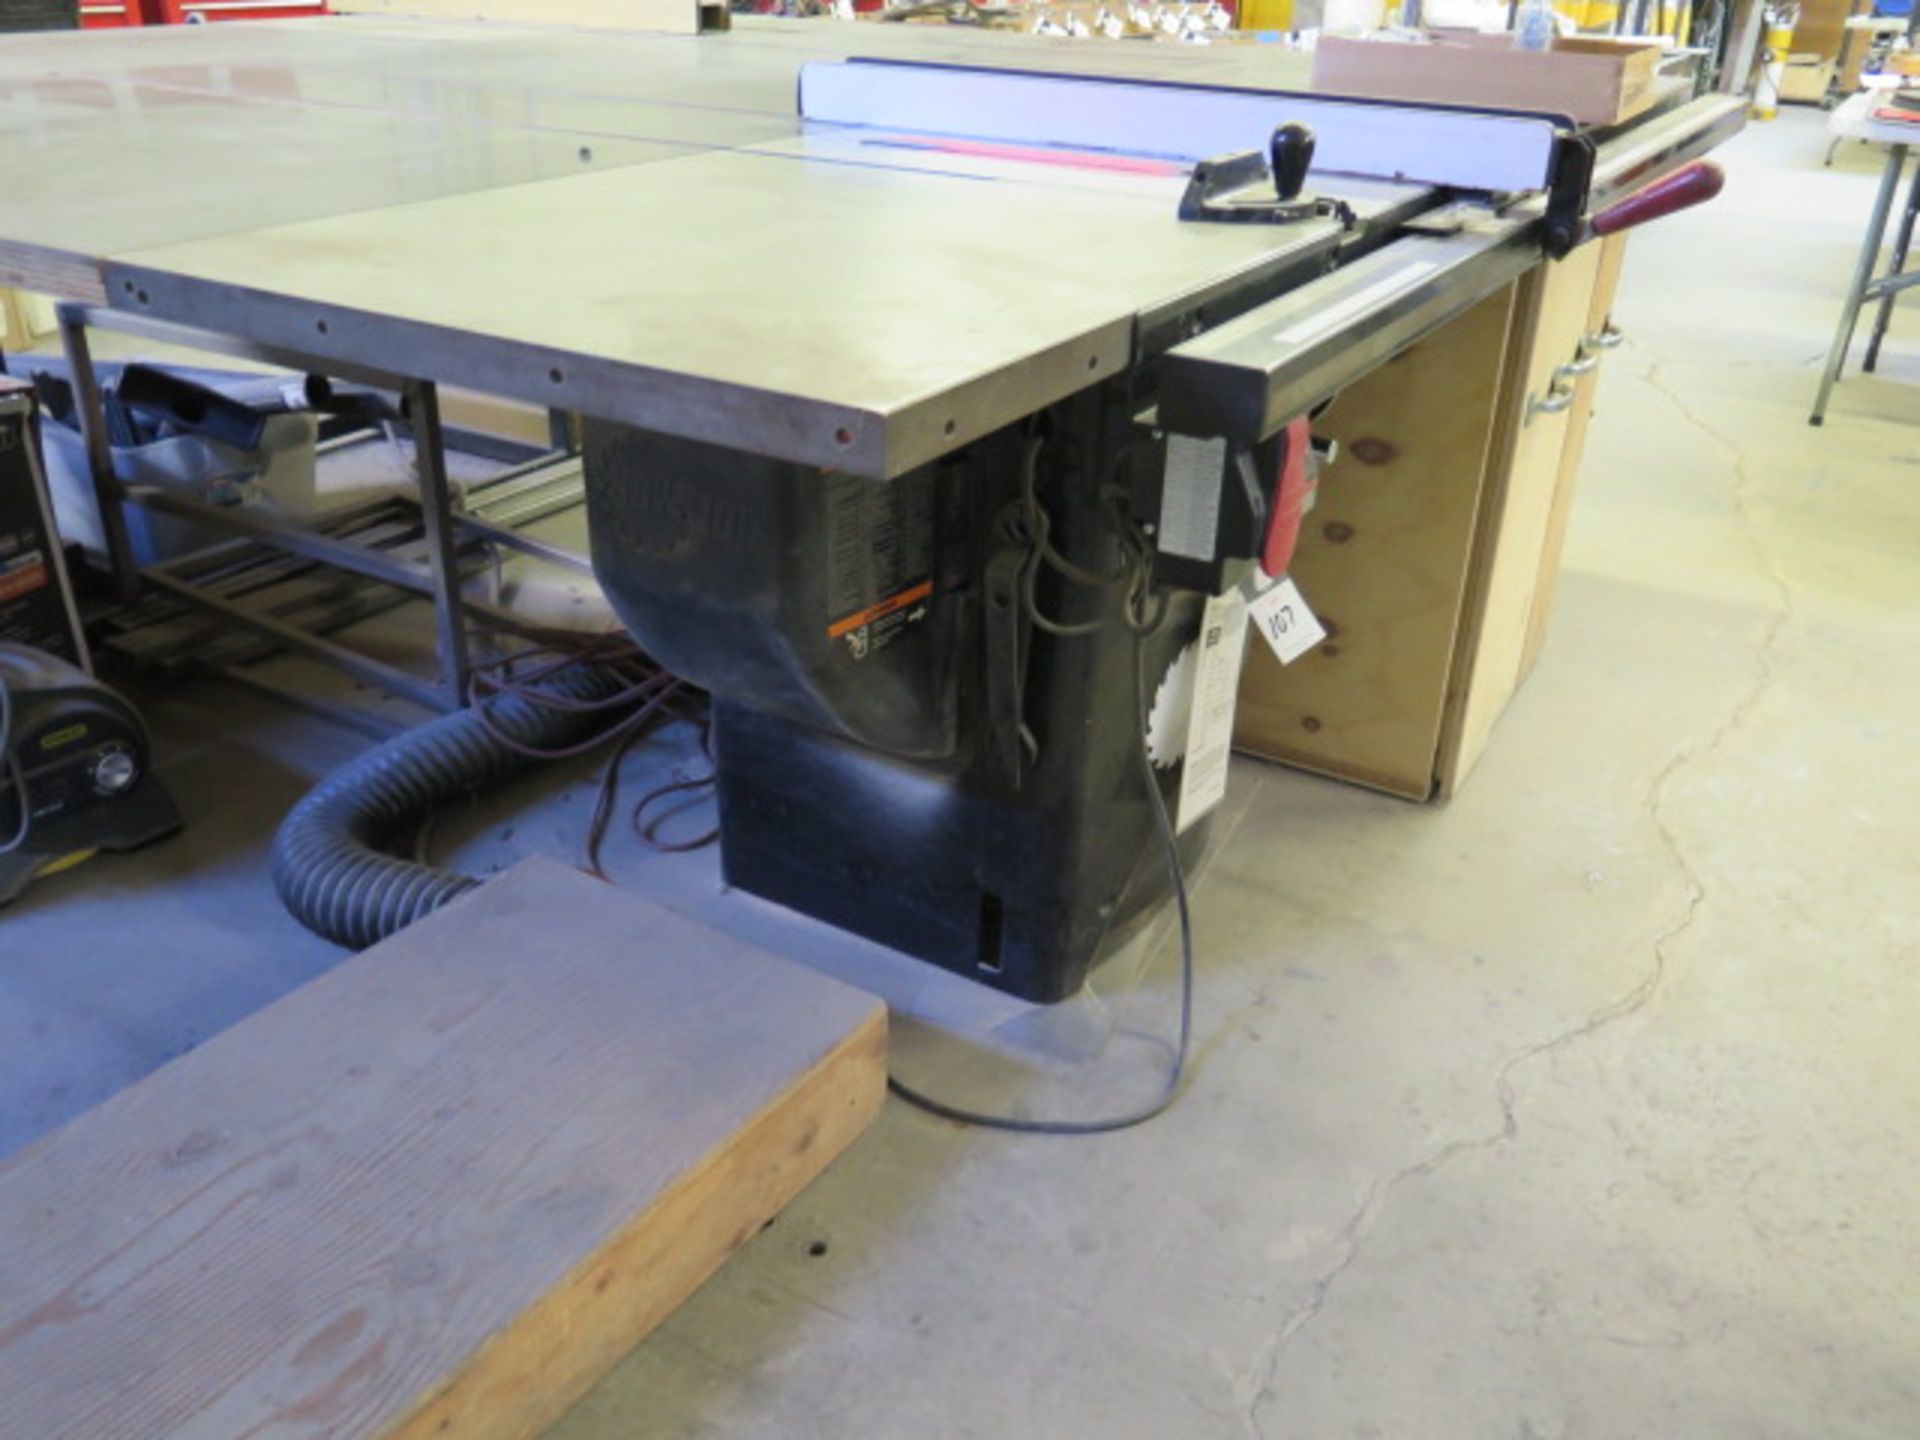 SawStop mdl. PCS 31230 10" Professional Cabinet Saw s/n P111130350 w/ Emerg Stop System, SOLD AS IS - Image 2 of 16